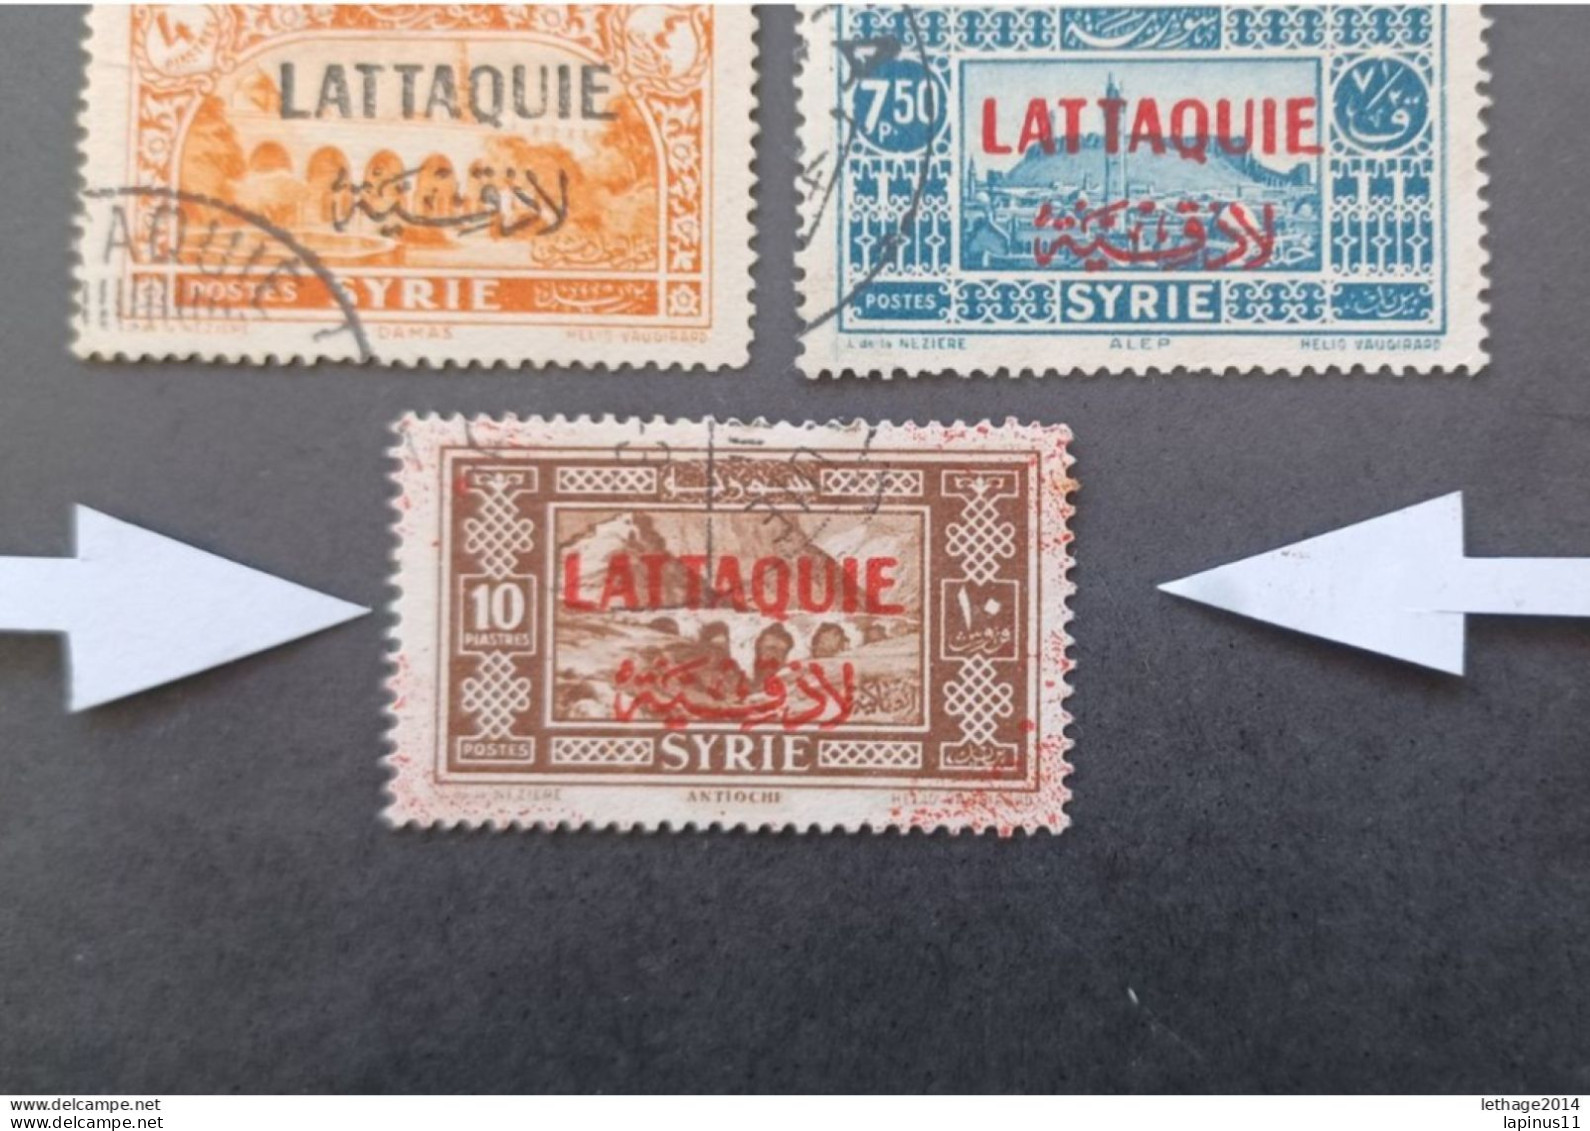 FRENCH OCCUPATION IN SYRIA LATTAQUIE 1940 STAMPS OF SYRIE DE 1930 IN OVERPRINT CAT YVERT N 1....15 RED STAINS - Usados